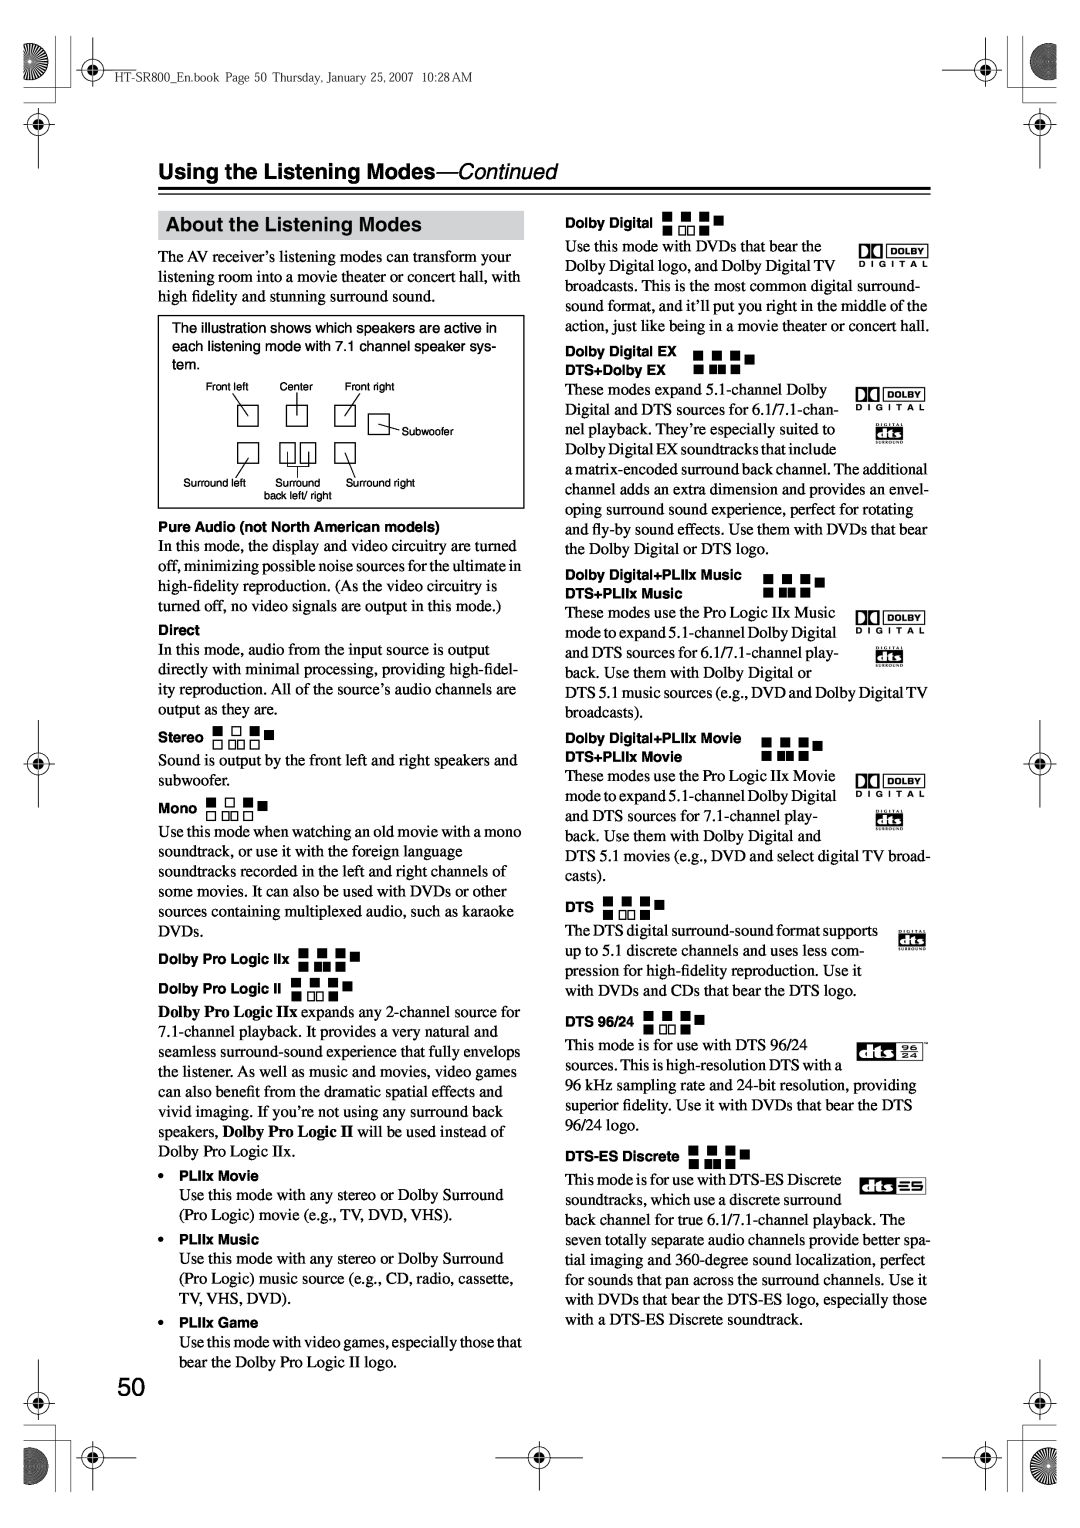 Onkyo HT-SR800 instruction manual About the Listening Modes, Using the Listening Modes-Continued 